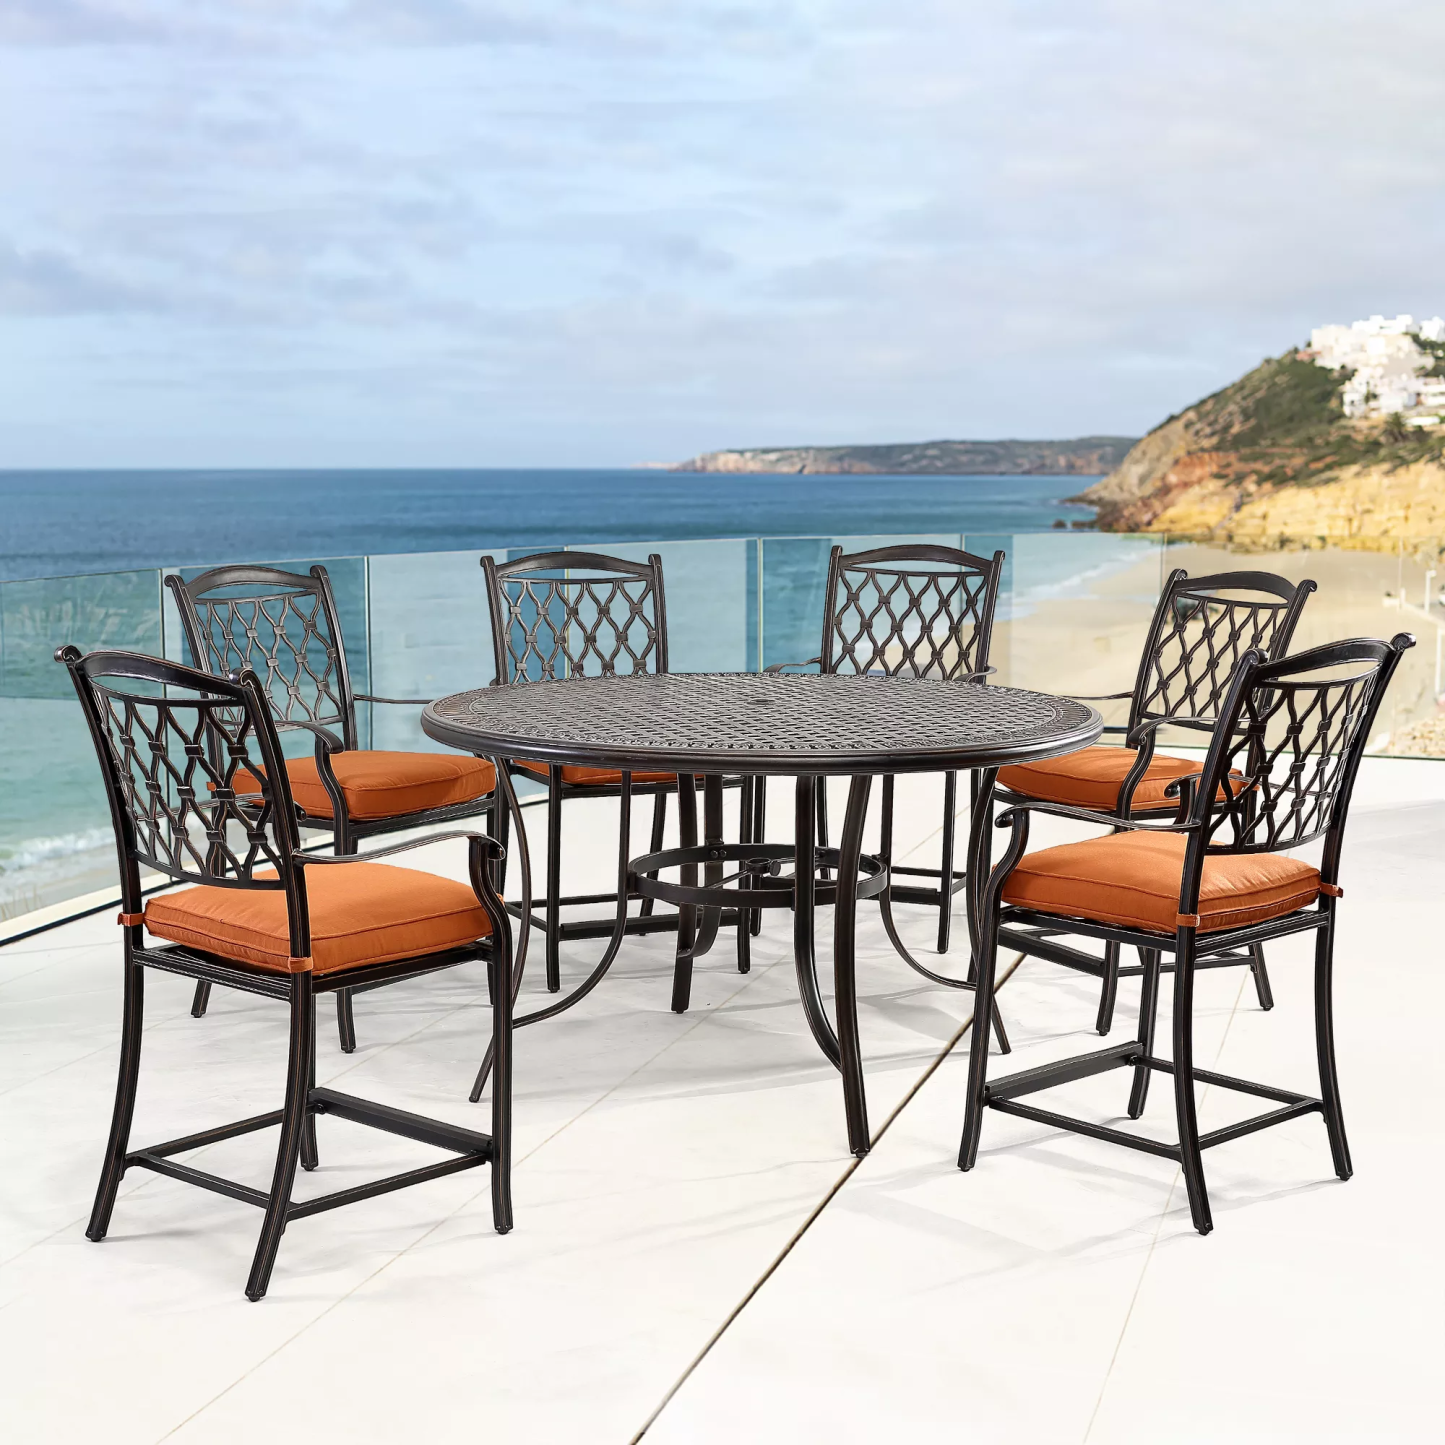 Mondawe 7Pcs Cast Aluminum Dining Bar Set with Round Table and Diamond-Mesh Curved Backrest Dining Chairs in Beige/Orange-Mondawe